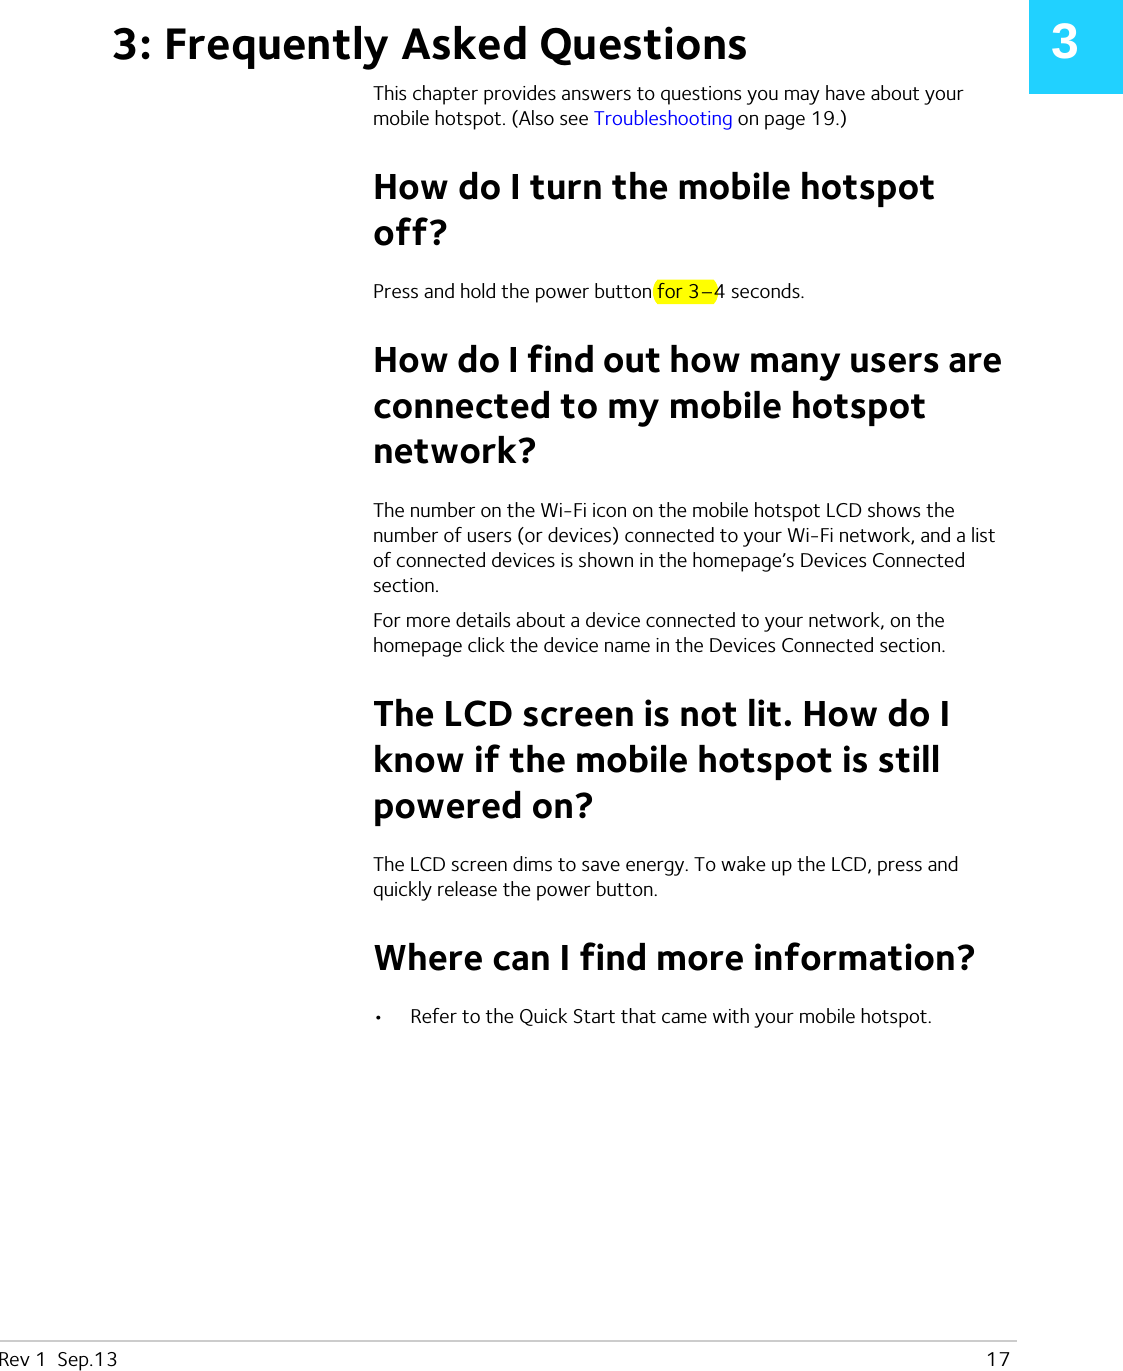 Rev 1  Sep.13   1733: Frequently Asked QuestionsThis chapter provides answers to questions you may have about your mobile hotspot. (Also see Troubleshooting on page 19.)How do I turn the mobile hotspot off?Press and hold the power button for 3–4 seconds.How do I find out how many users are connected to my mobile hotspot network?The number on the Wi-Fi icon on the mobile hotspot LCD shows the number of users (or devices) connected to your Wi-Fi network, and a list of connected devices is shown in the homepage’s Devices Connected section.For more details about a device connected to your network, on the homepage click the device name in the Devices Connected section.The LCD screen is not lit. How do I know if the mobile hotspot is still powered on?The LCD screen dims to save energy. To wake up the LCD, press and quickly release the power button.Where can I find more information?•Refer to the Quick Start that came with your mobile hotspot.